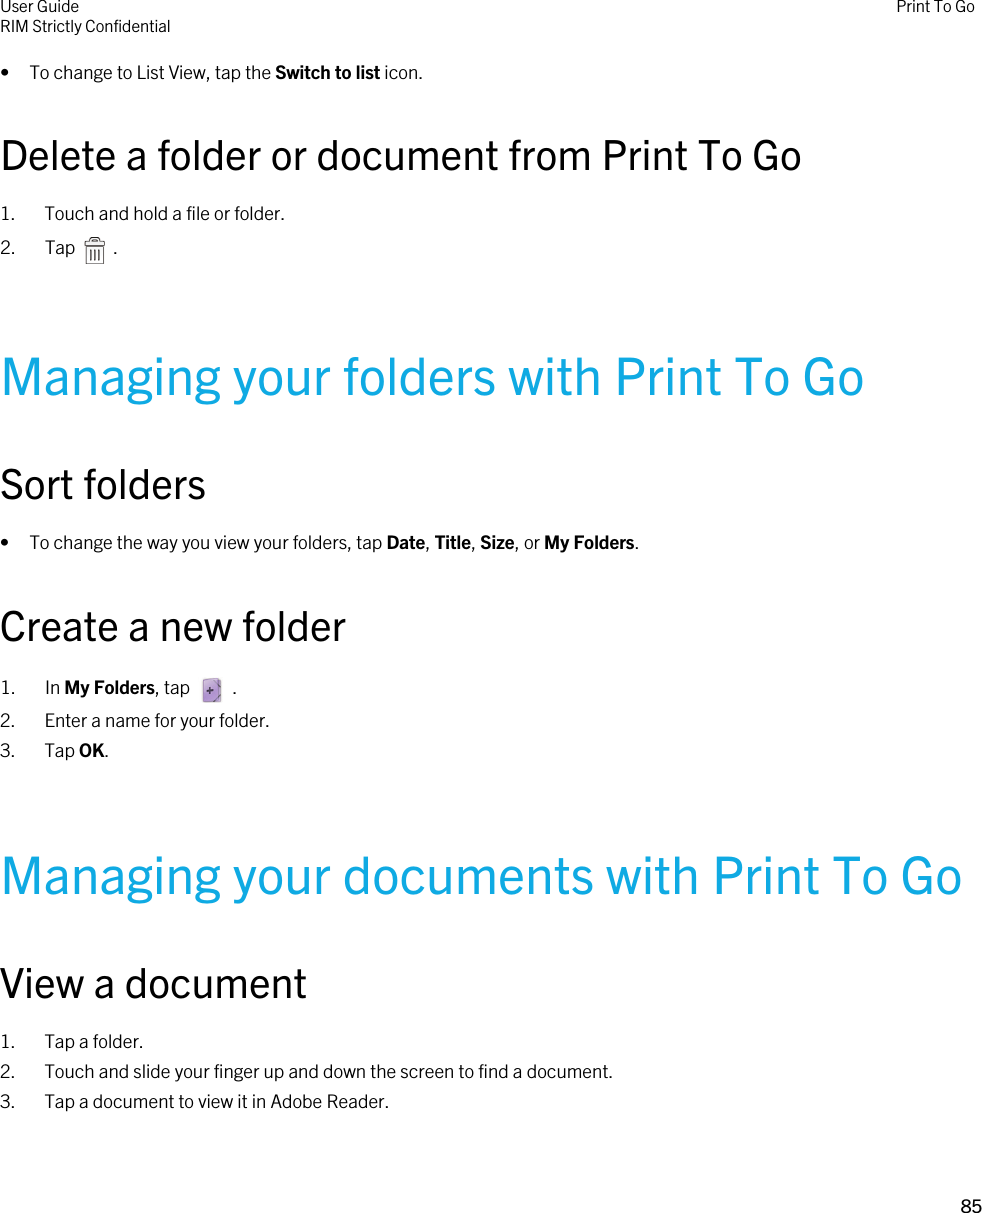 • To change to List View, tap the Switch to list icon.Delete a folder or document from Print To Go1. Touch and hold a file or folder.2.  Tap    .Managing your folders with Print To GoSort folders• To change the way you view your folders, tap Date, Title, Size, or My Folders.Create a new folder1.  In My Folders, tap    .2. Enter a name for your folder.3. Tap OK.Managing your documents with Print To GoView a document1. Tap a folder.2. Touch and slide your finger up and down the screen to find a document.3. Tap a document to view it in Adobe Reader.User GuideRIM Strictly ConfidentialPrint To Go85 